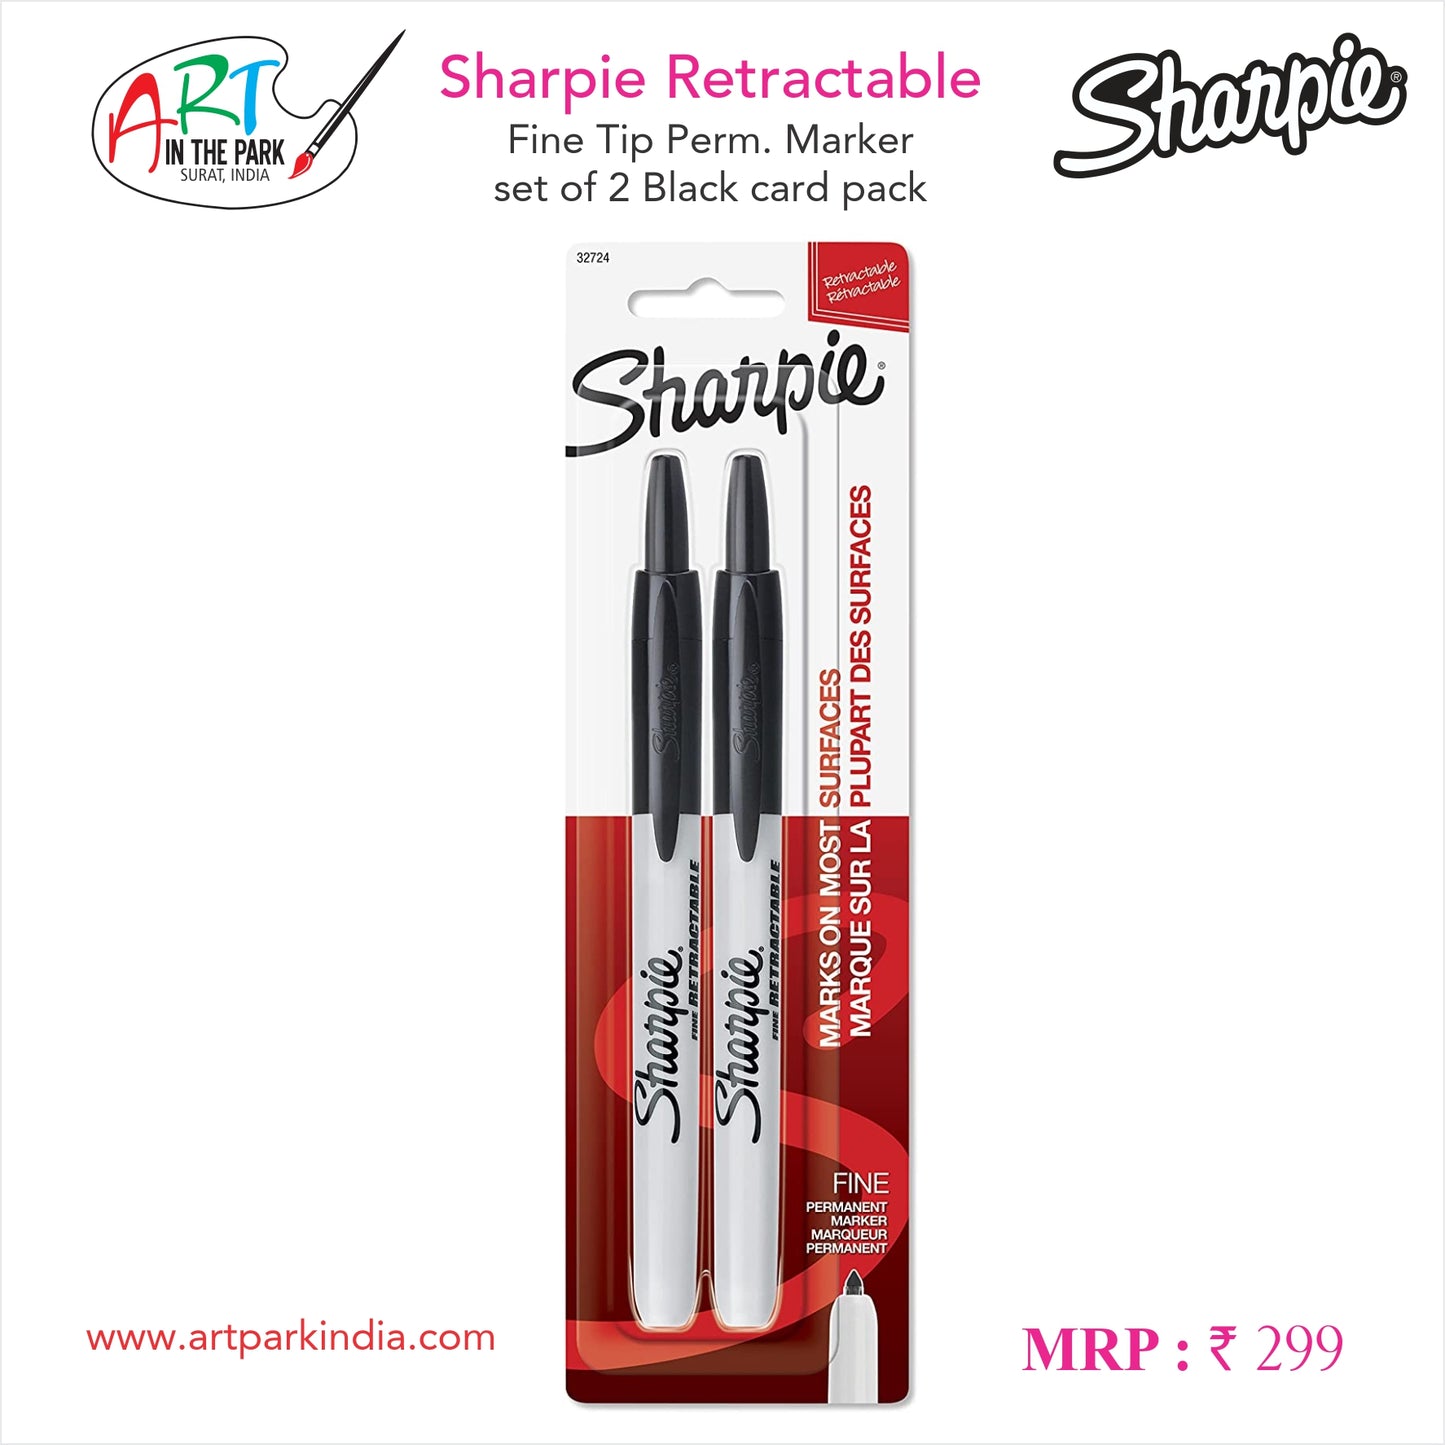 SHARPIE RETRACTABLE FINE TIP PERM. MARKER SET OF 2 CARD PACK